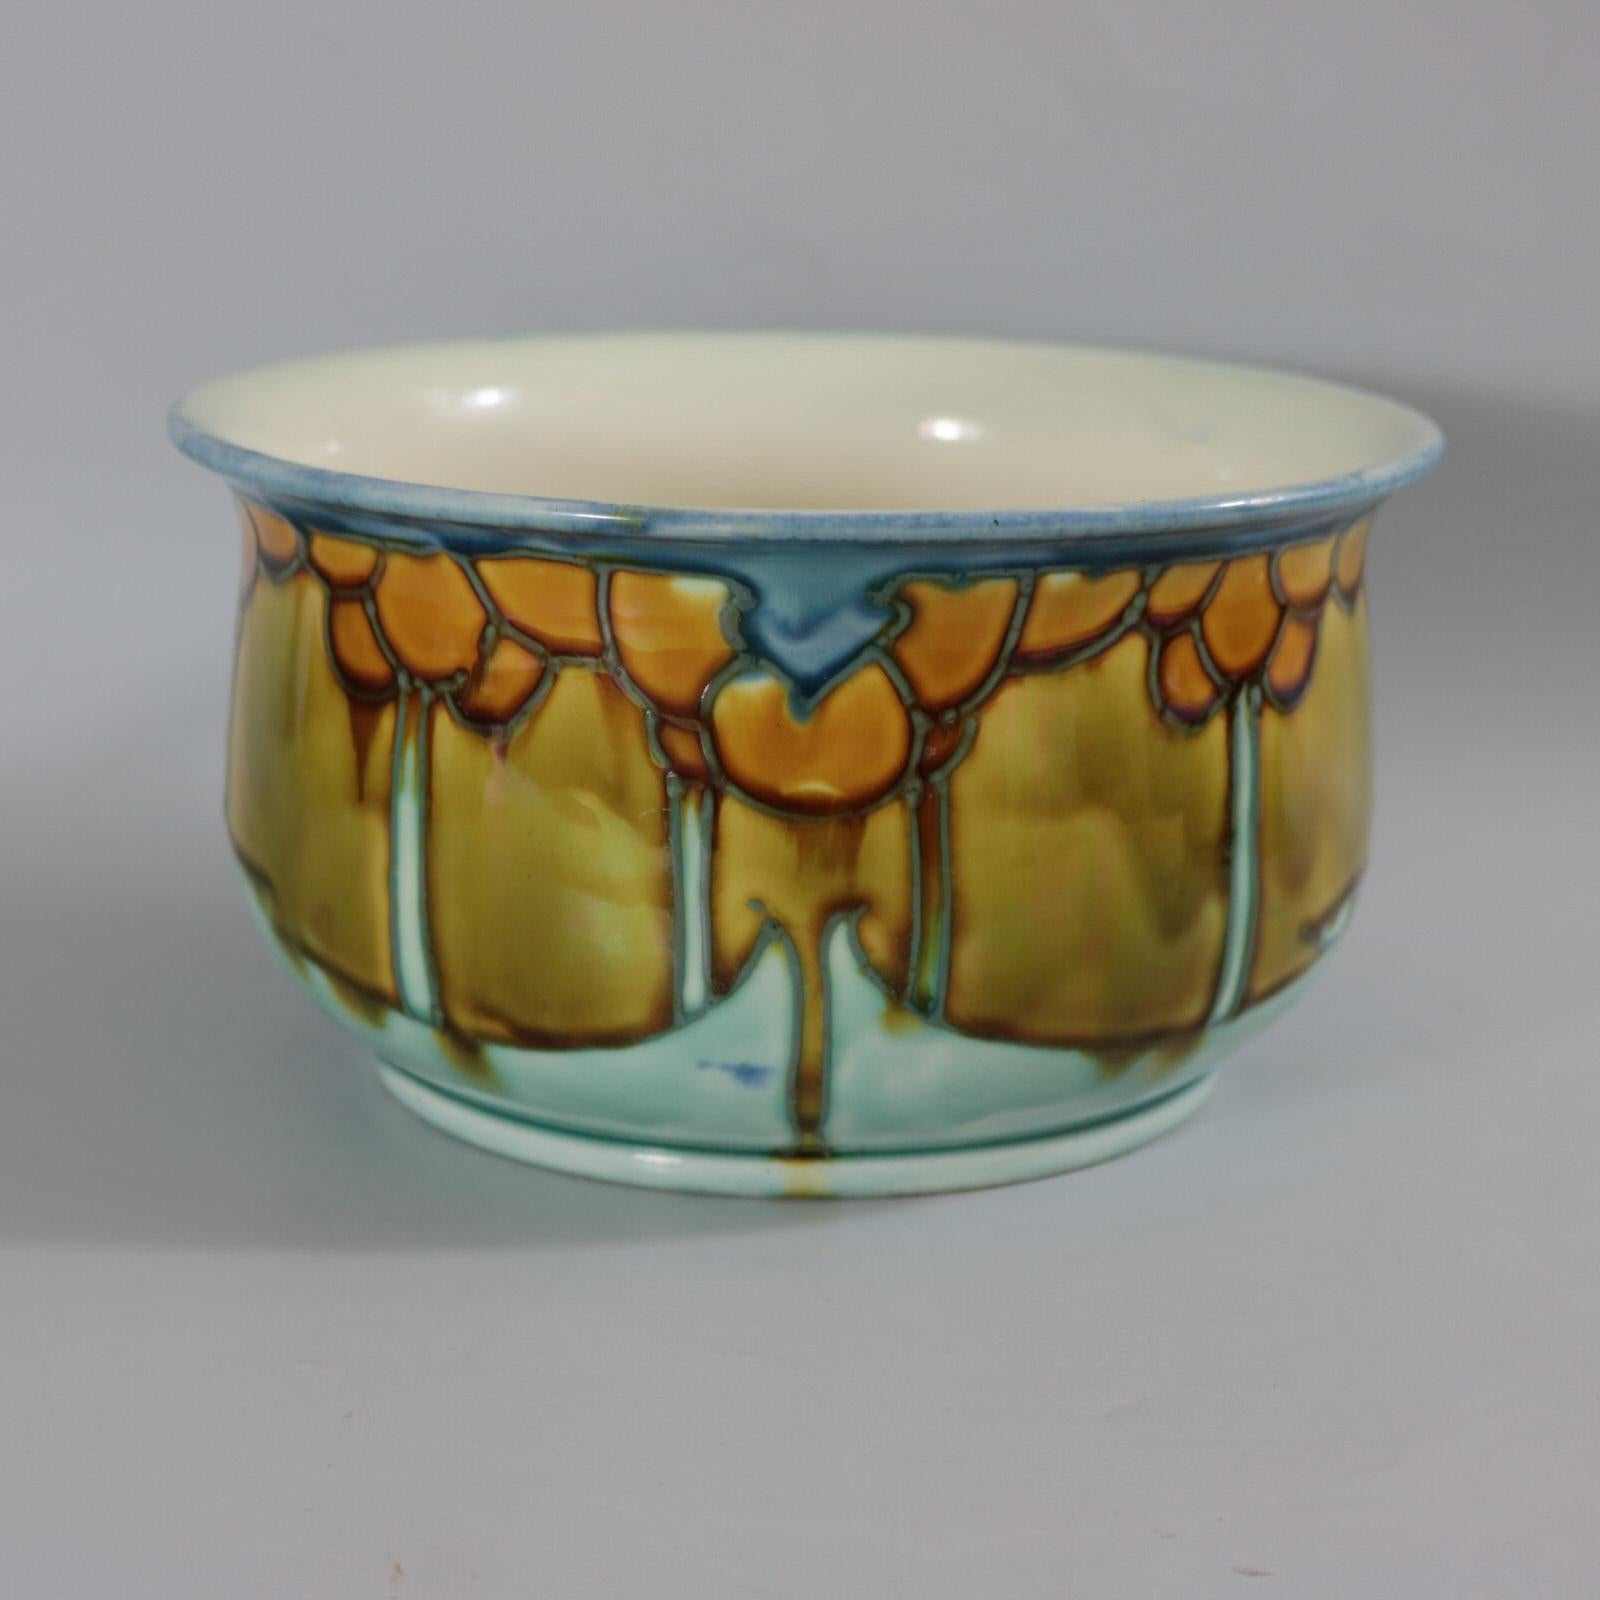 Minton Secessionist No.8 chamber pot decorated with Art Nouveau style tree motifs. Glazed in blue, ochre and green with gray tube lining. Cream interior and underside. Three stilt marks to underside along with maker's marks printed 'MINTONS LTD